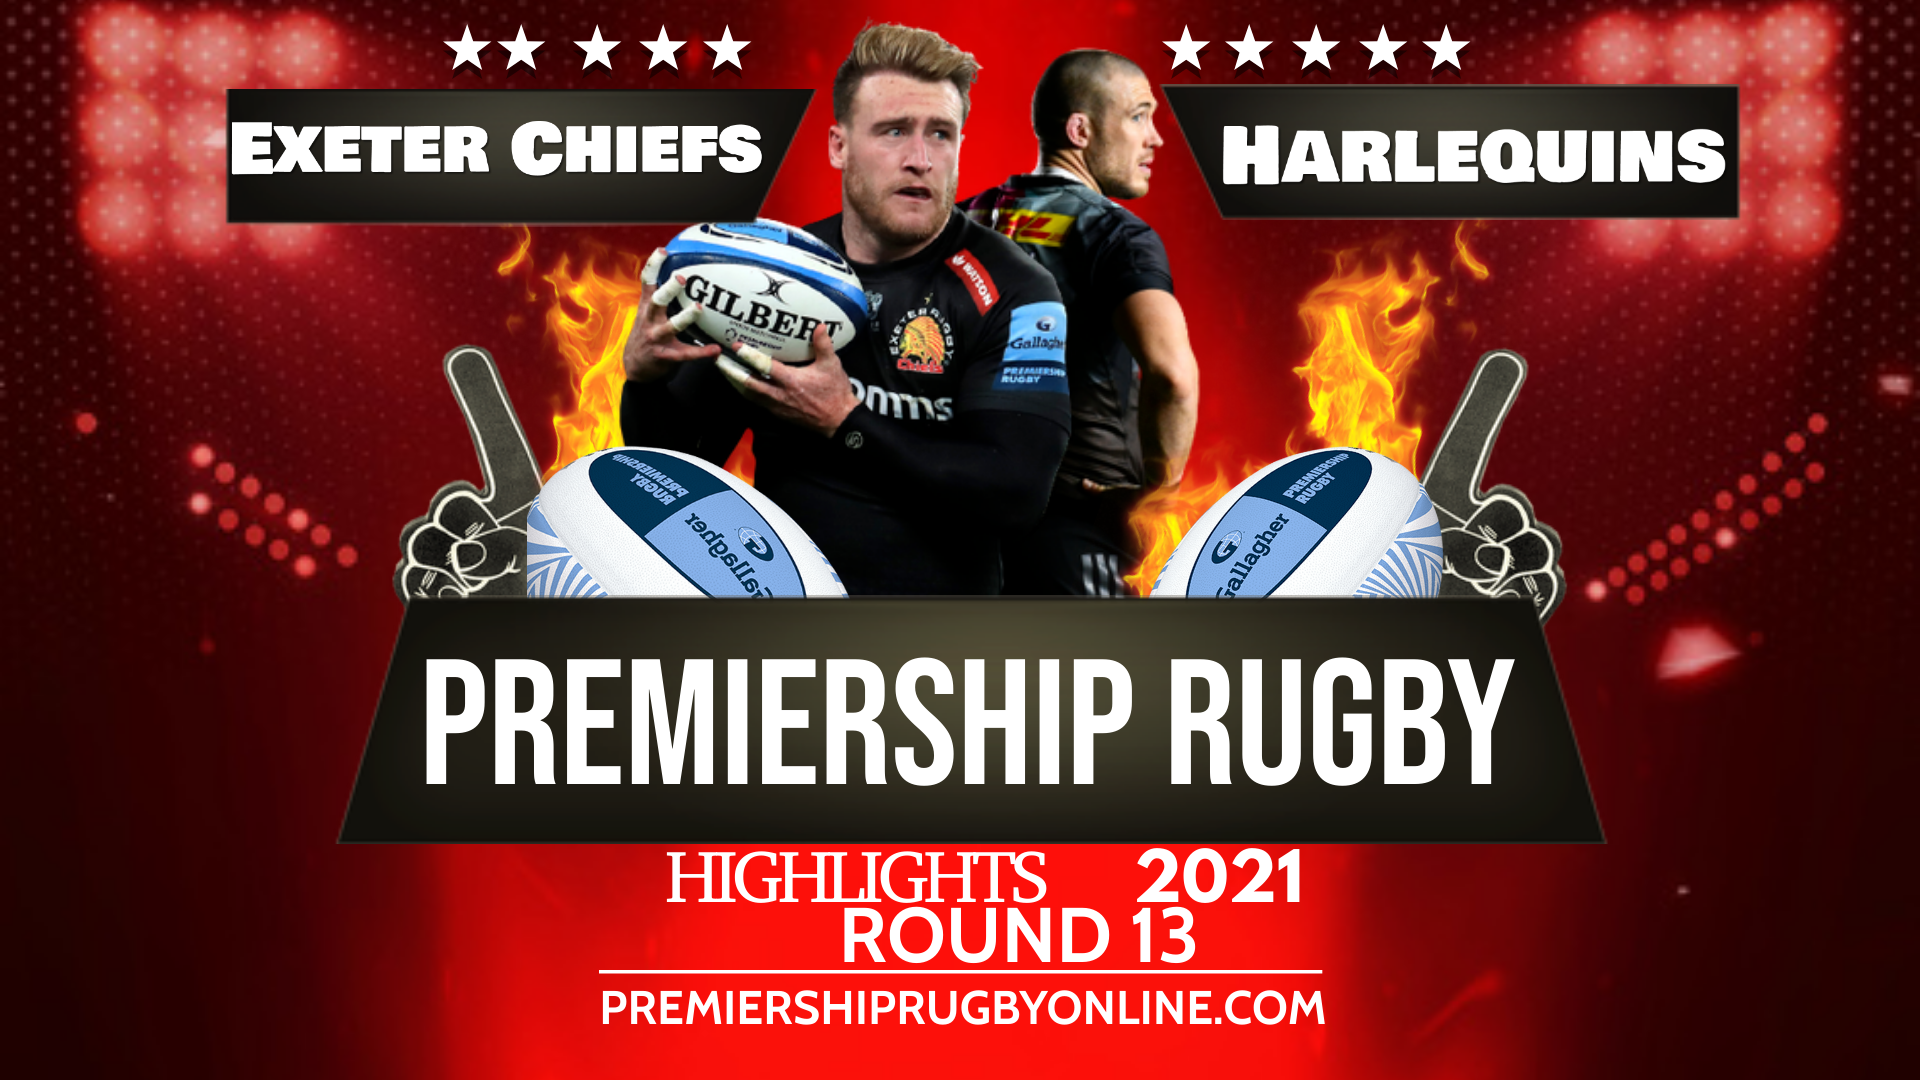 Exeter Chiefs Vs Harlequins Highlights 2021 RD 13